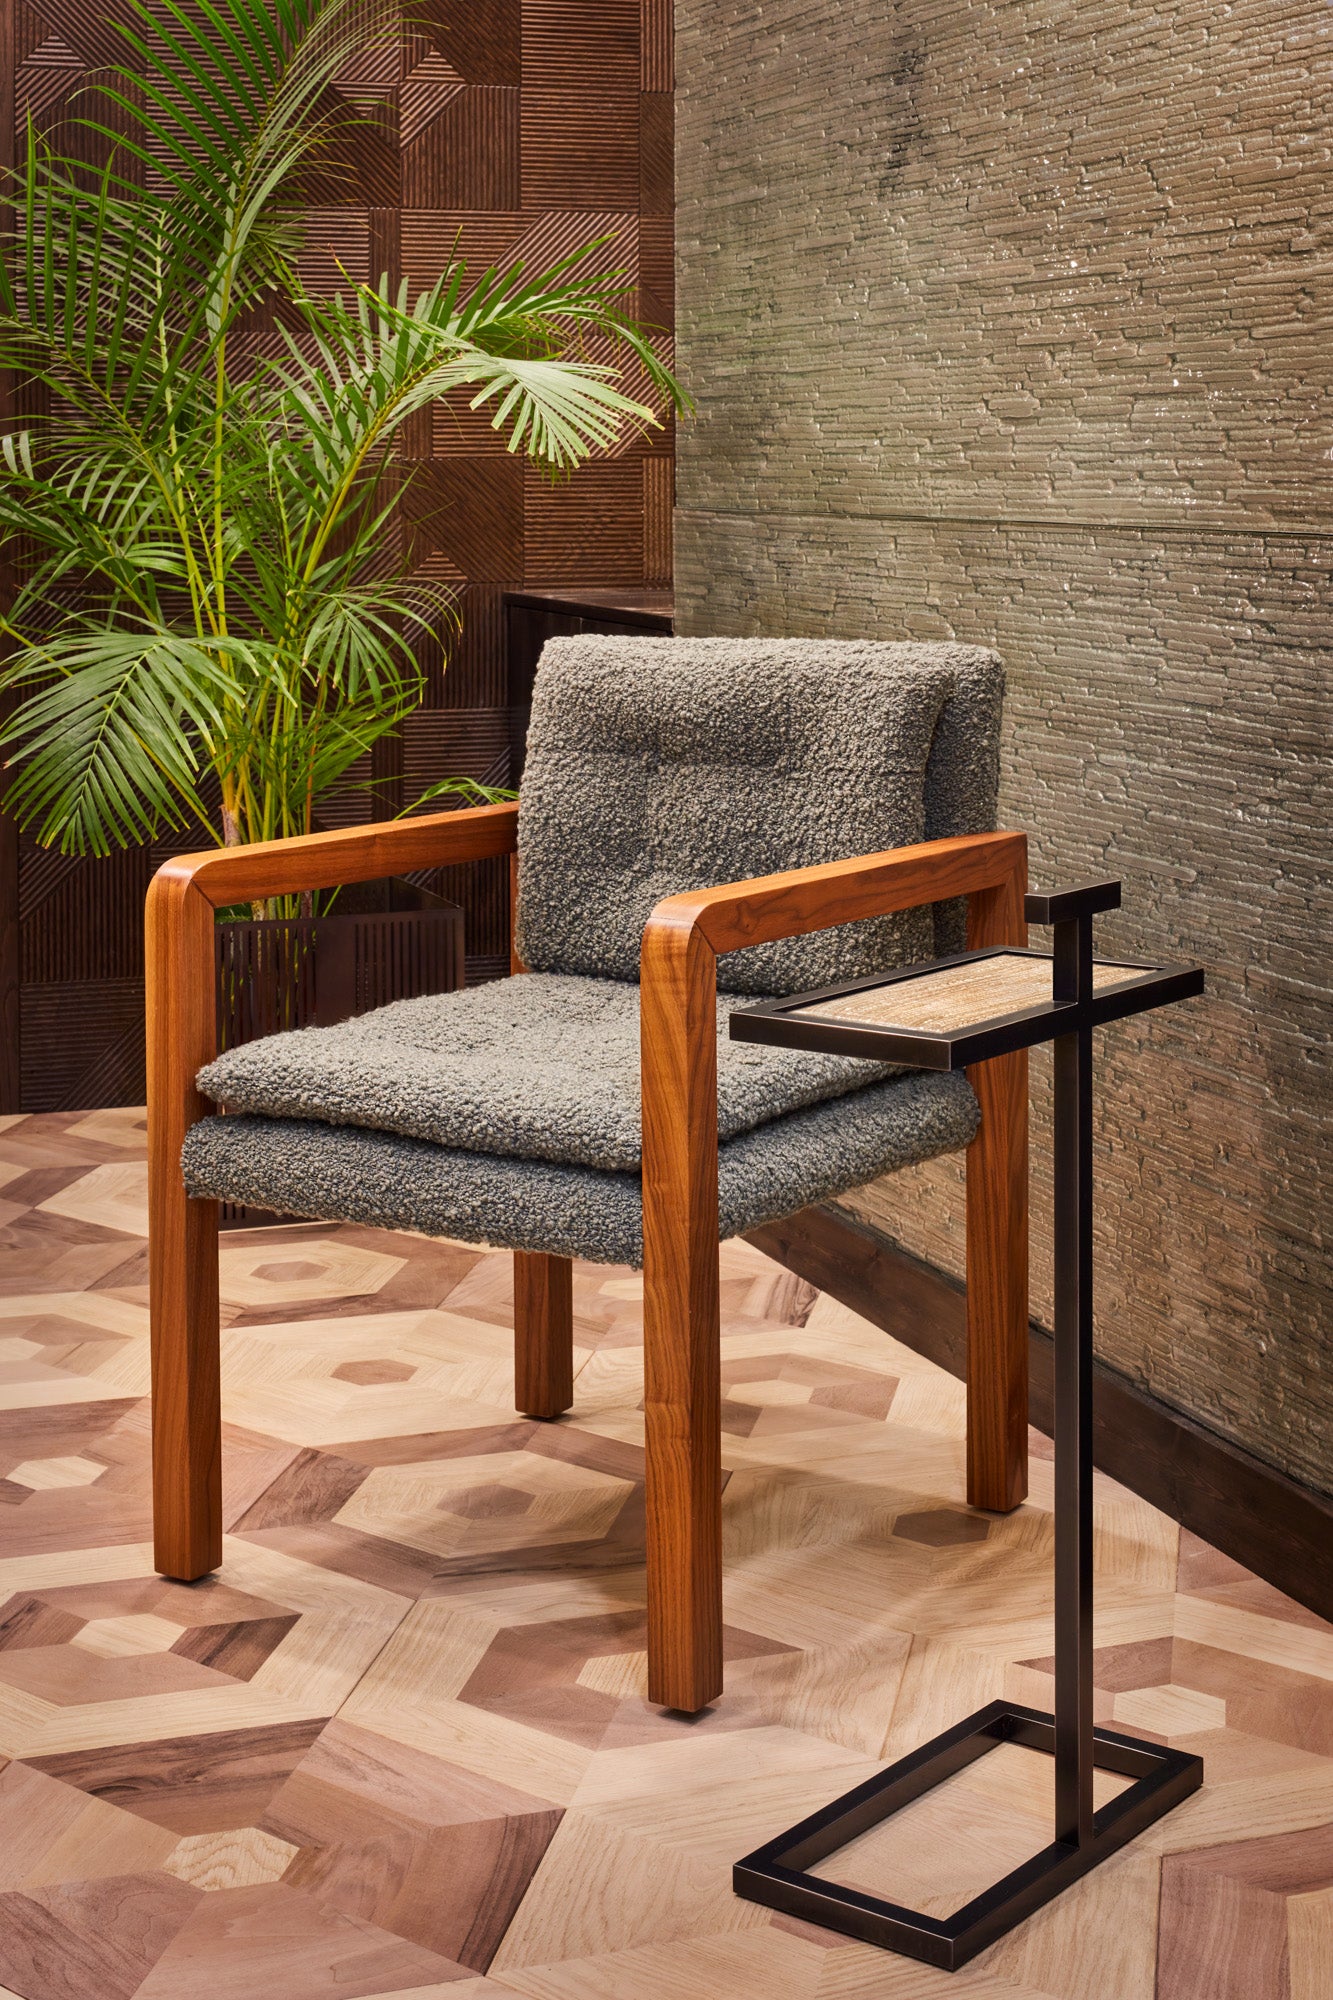 Dining in your own home has never been so luxurious until now! The Bacco Carver chair is an architectural seating design with strong angles and solid form; a design that demands attention. A signature style of the Casa Botelho brand is a unique